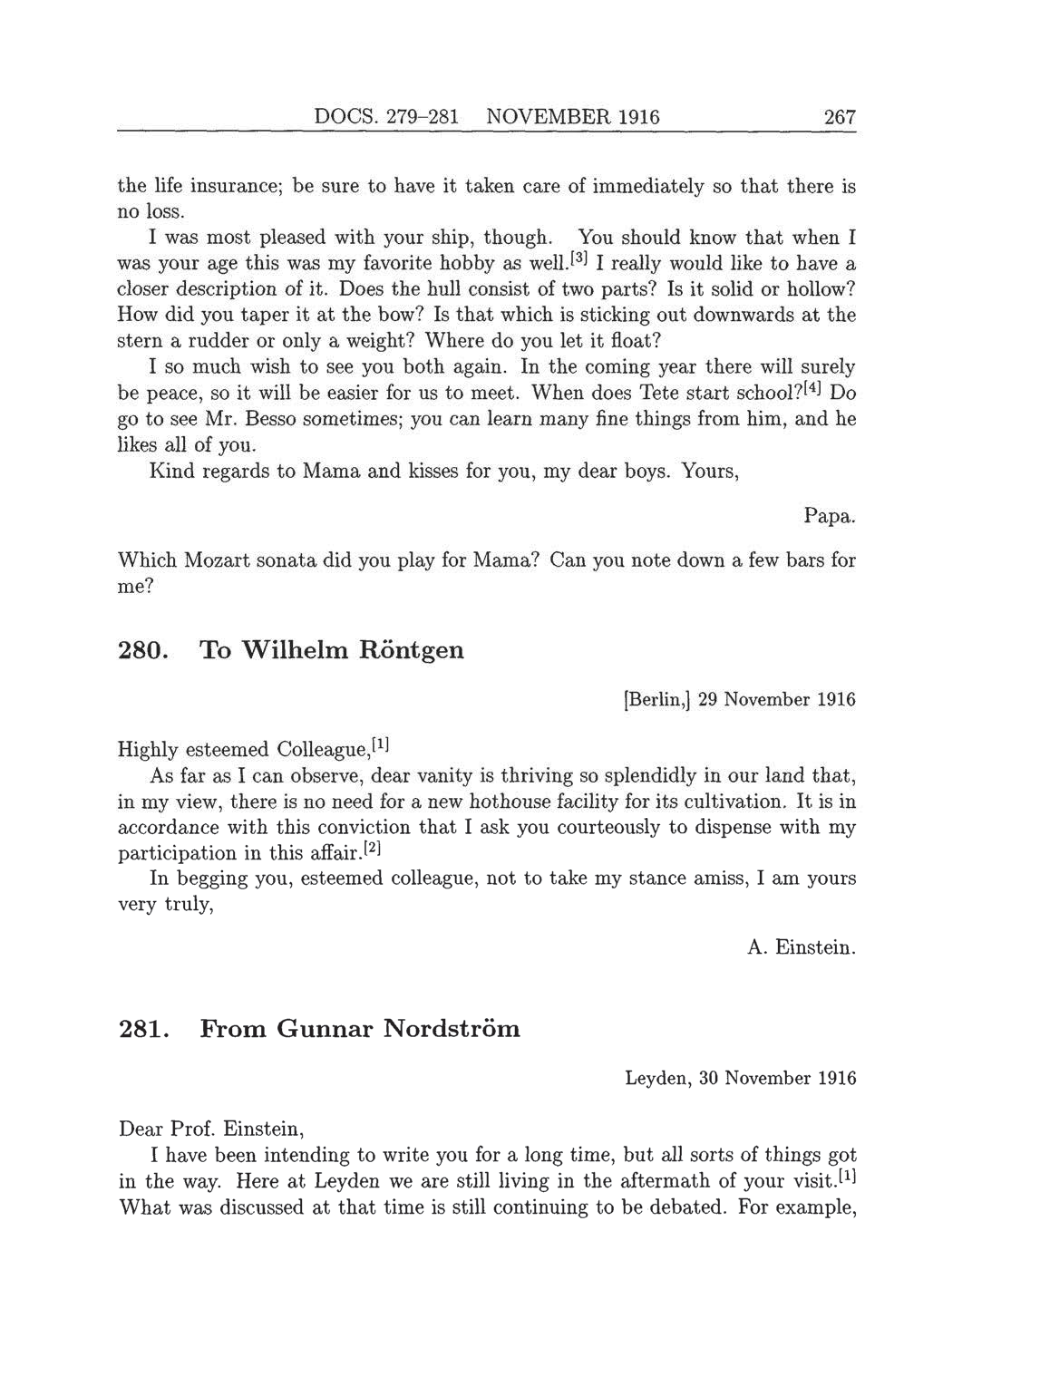 Volume 8: The Berlin Years: Correspondence, 1914-1918 (English translation supplement) page 267